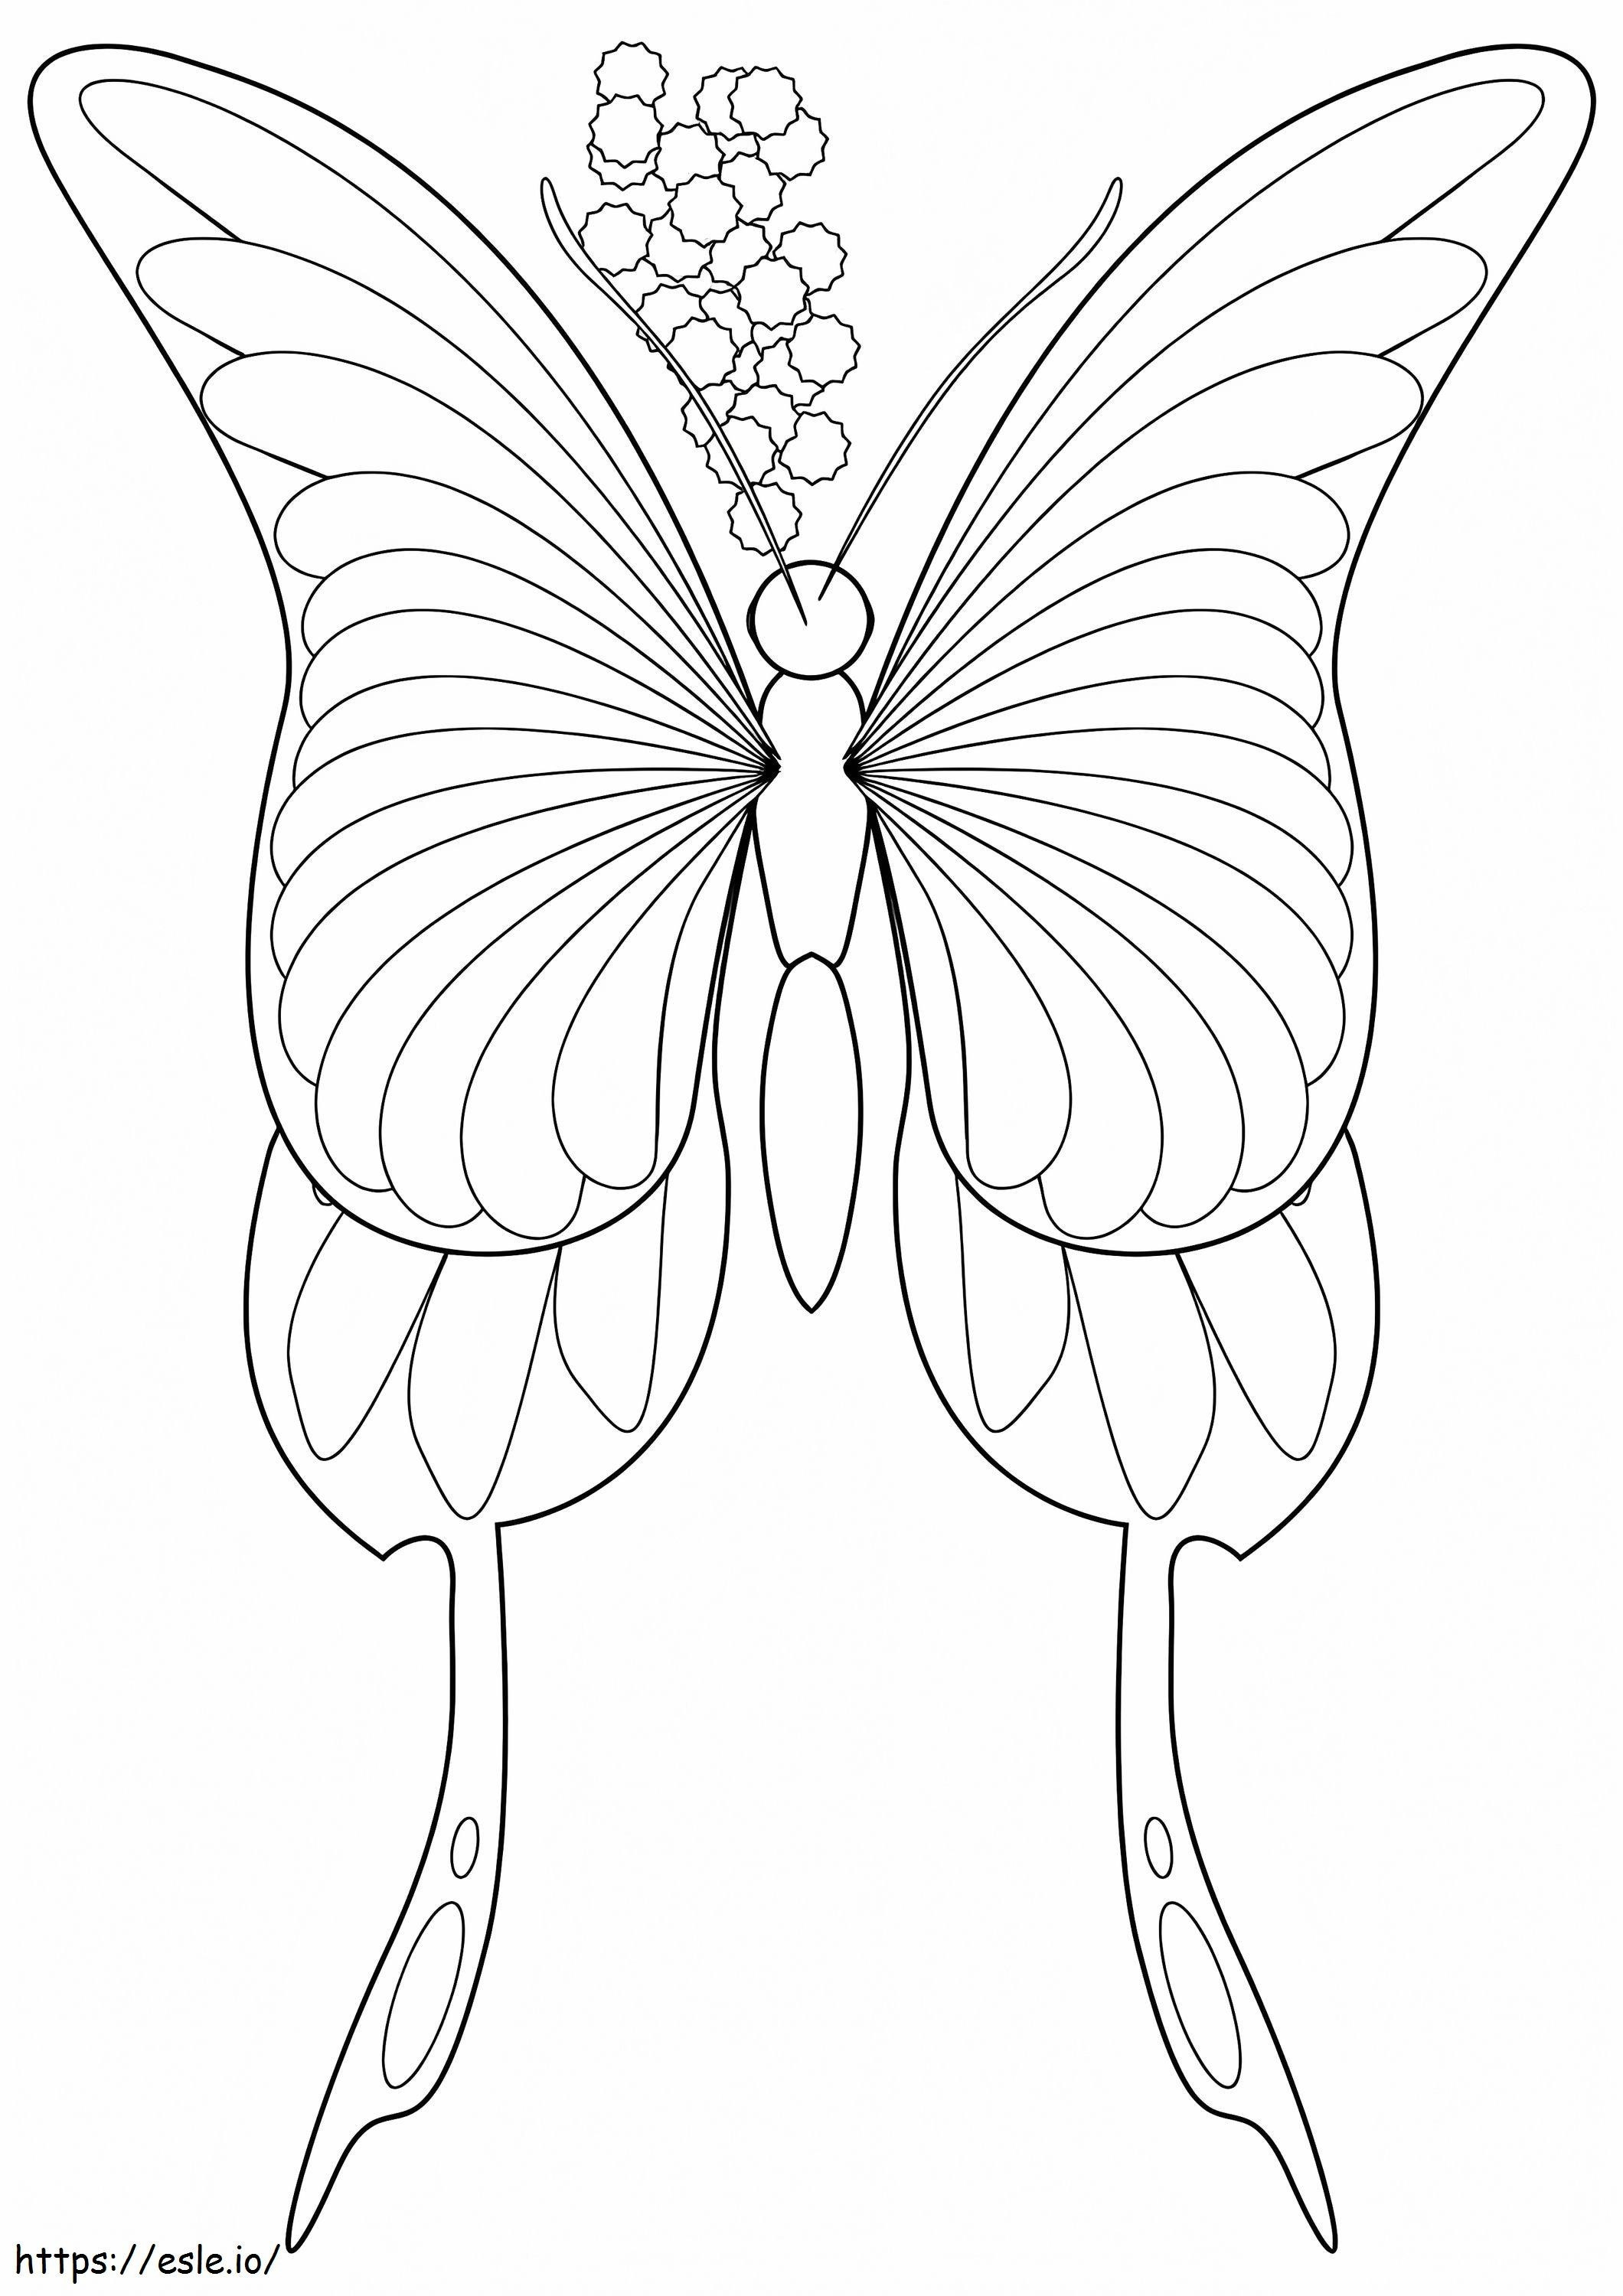 Wonderful Butterfly coloring page